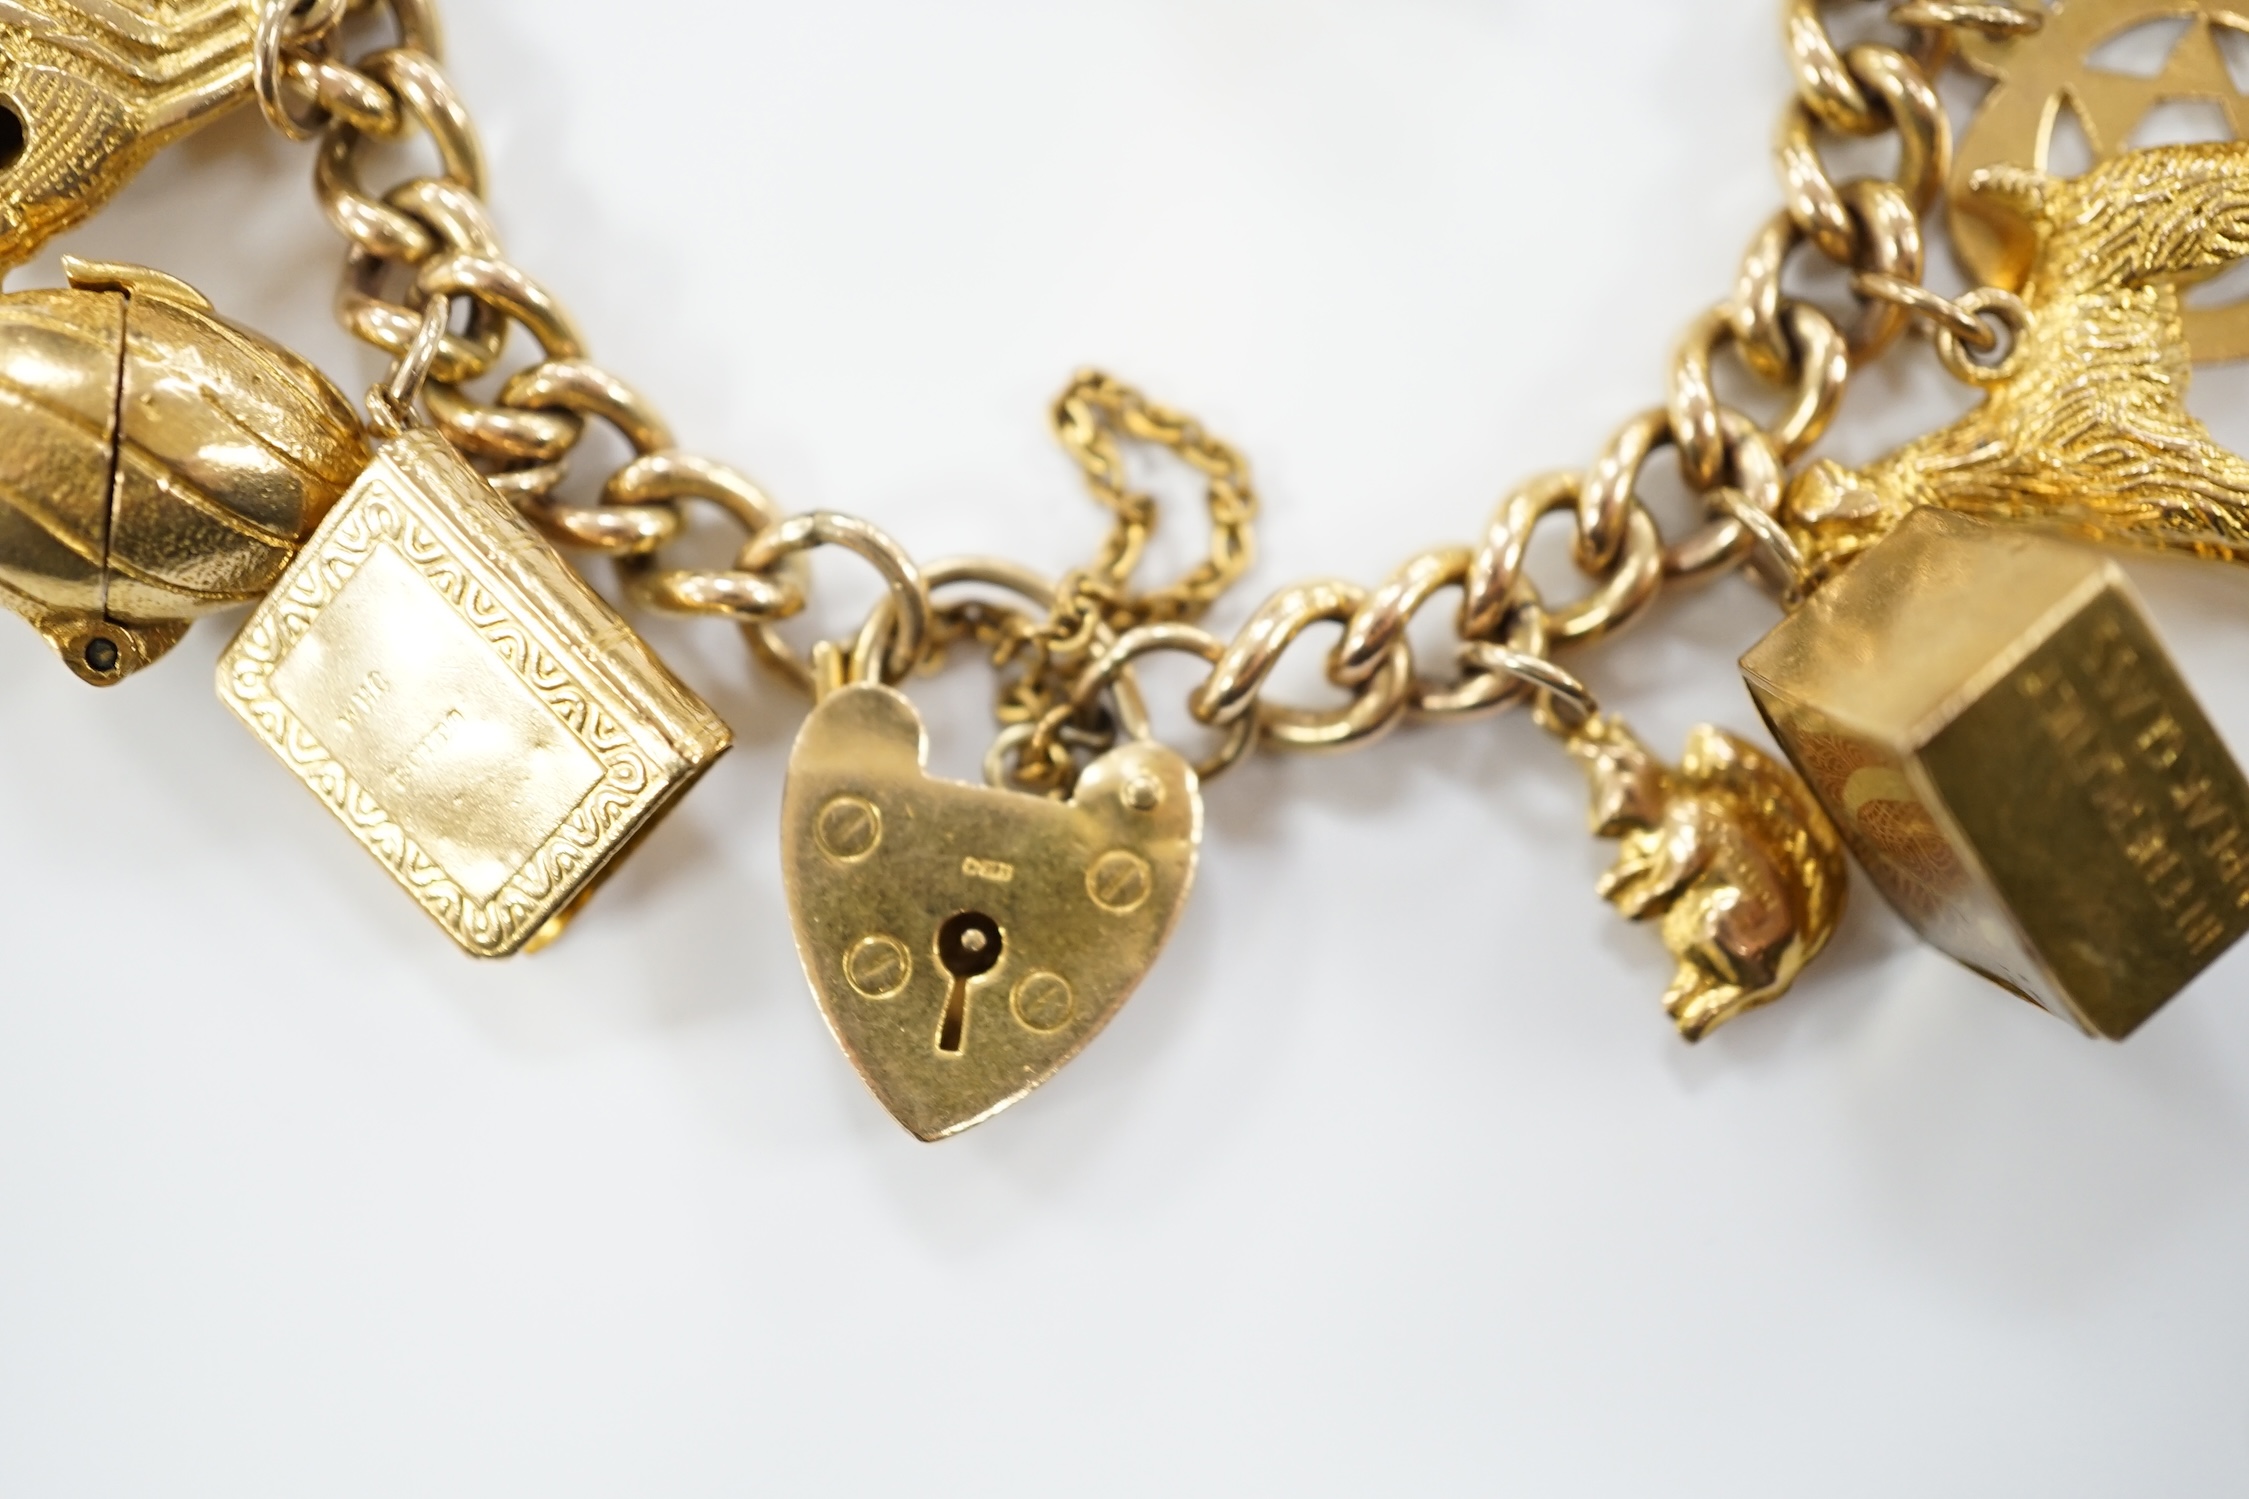 A 9ct gold curb link charm bracelet, with heart shaped padlock clasp and hung with assorted mainly 9ct gold charms